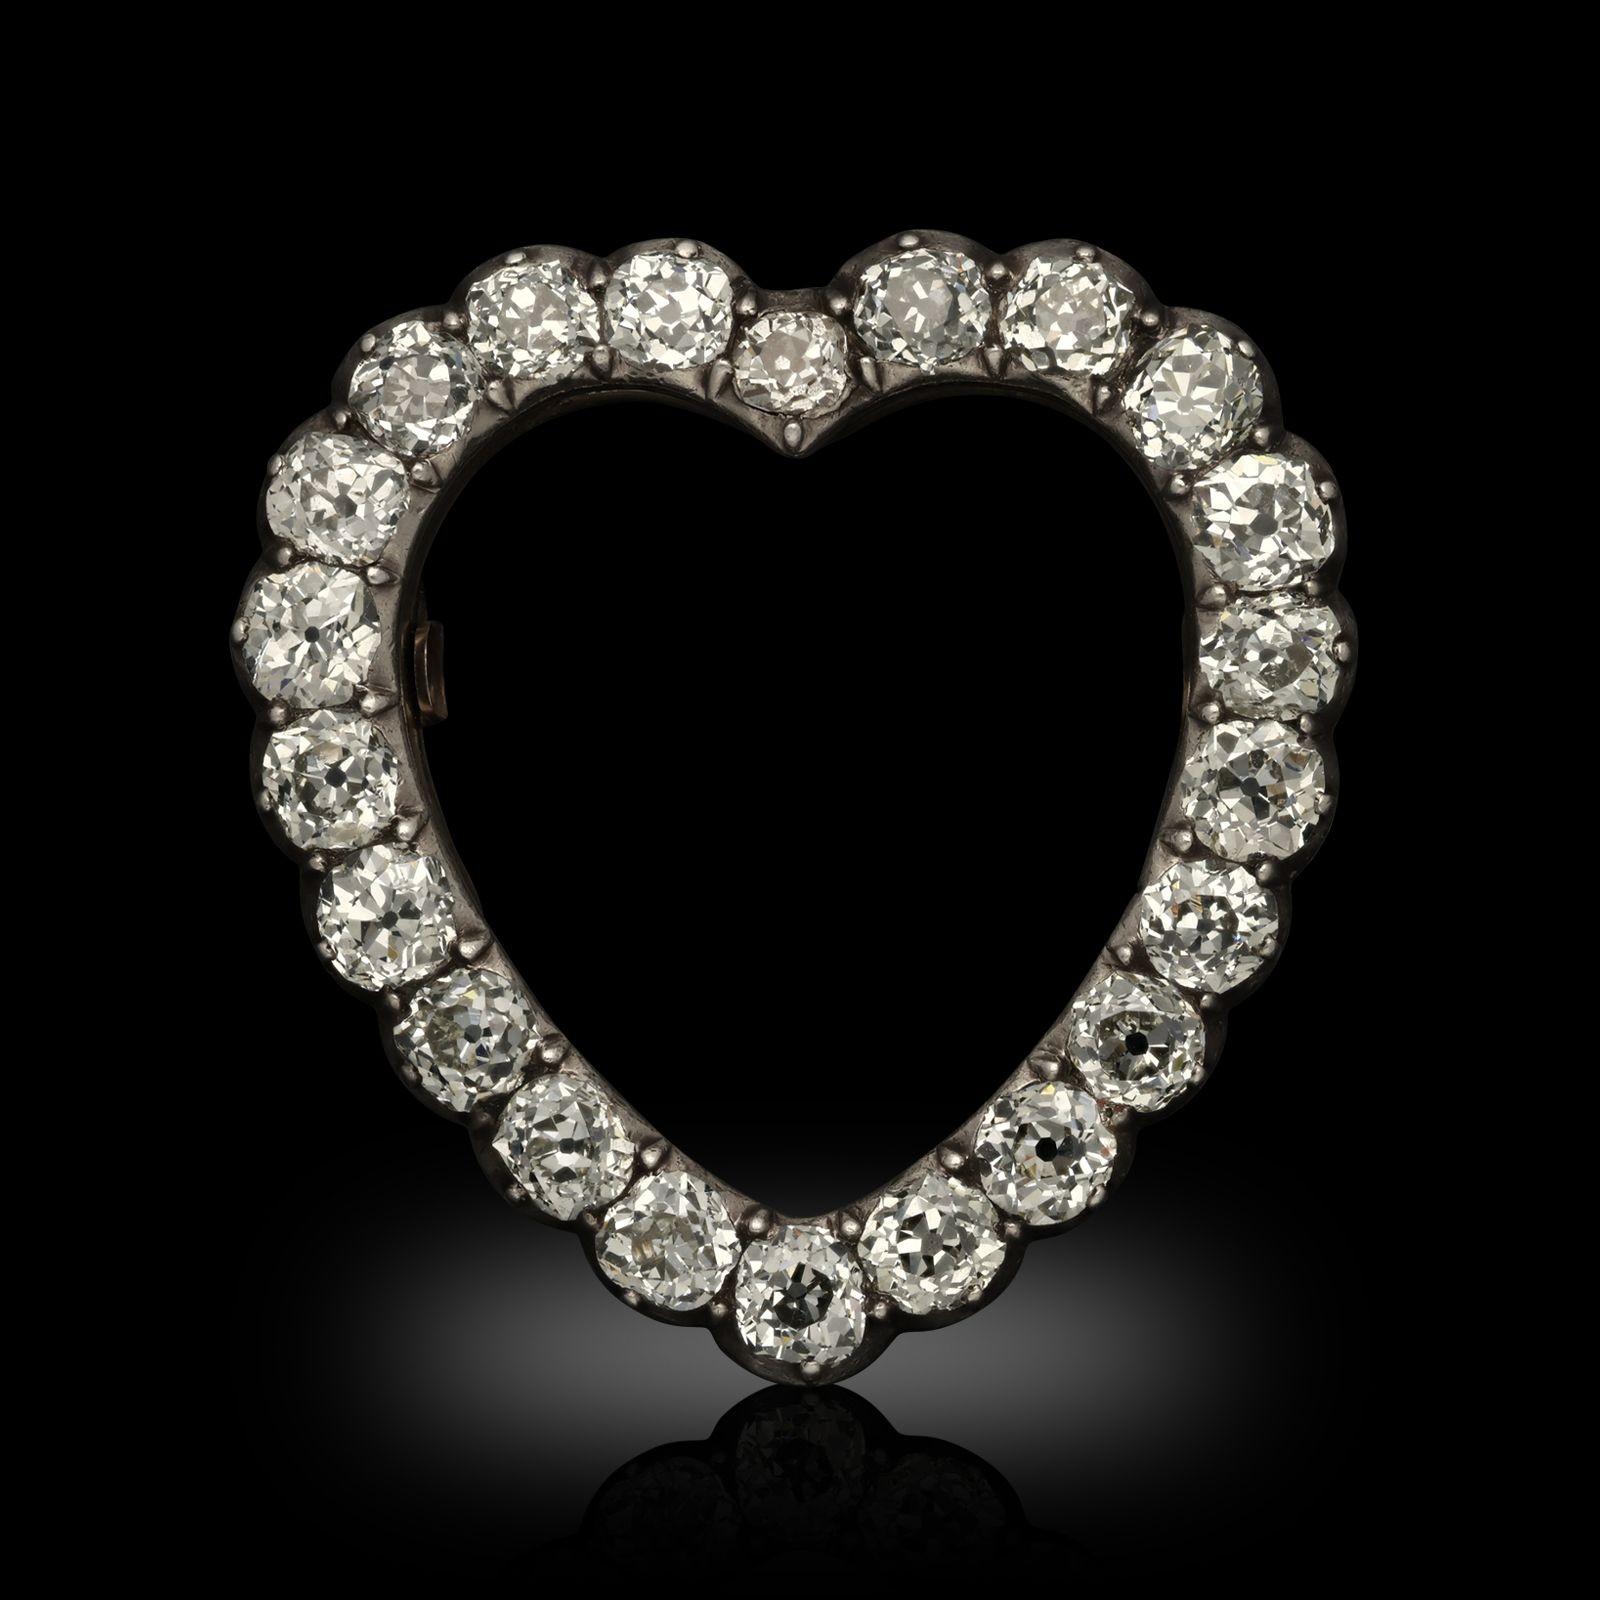 An antique old cut diamond heart brooch, circa 1820. The Georgian brooch is designed as an open heart shape, set with twenty-two old European cut diamonds all mounted in silver and gold with a single pin fitting to the reverse.
Period
Georgian circa